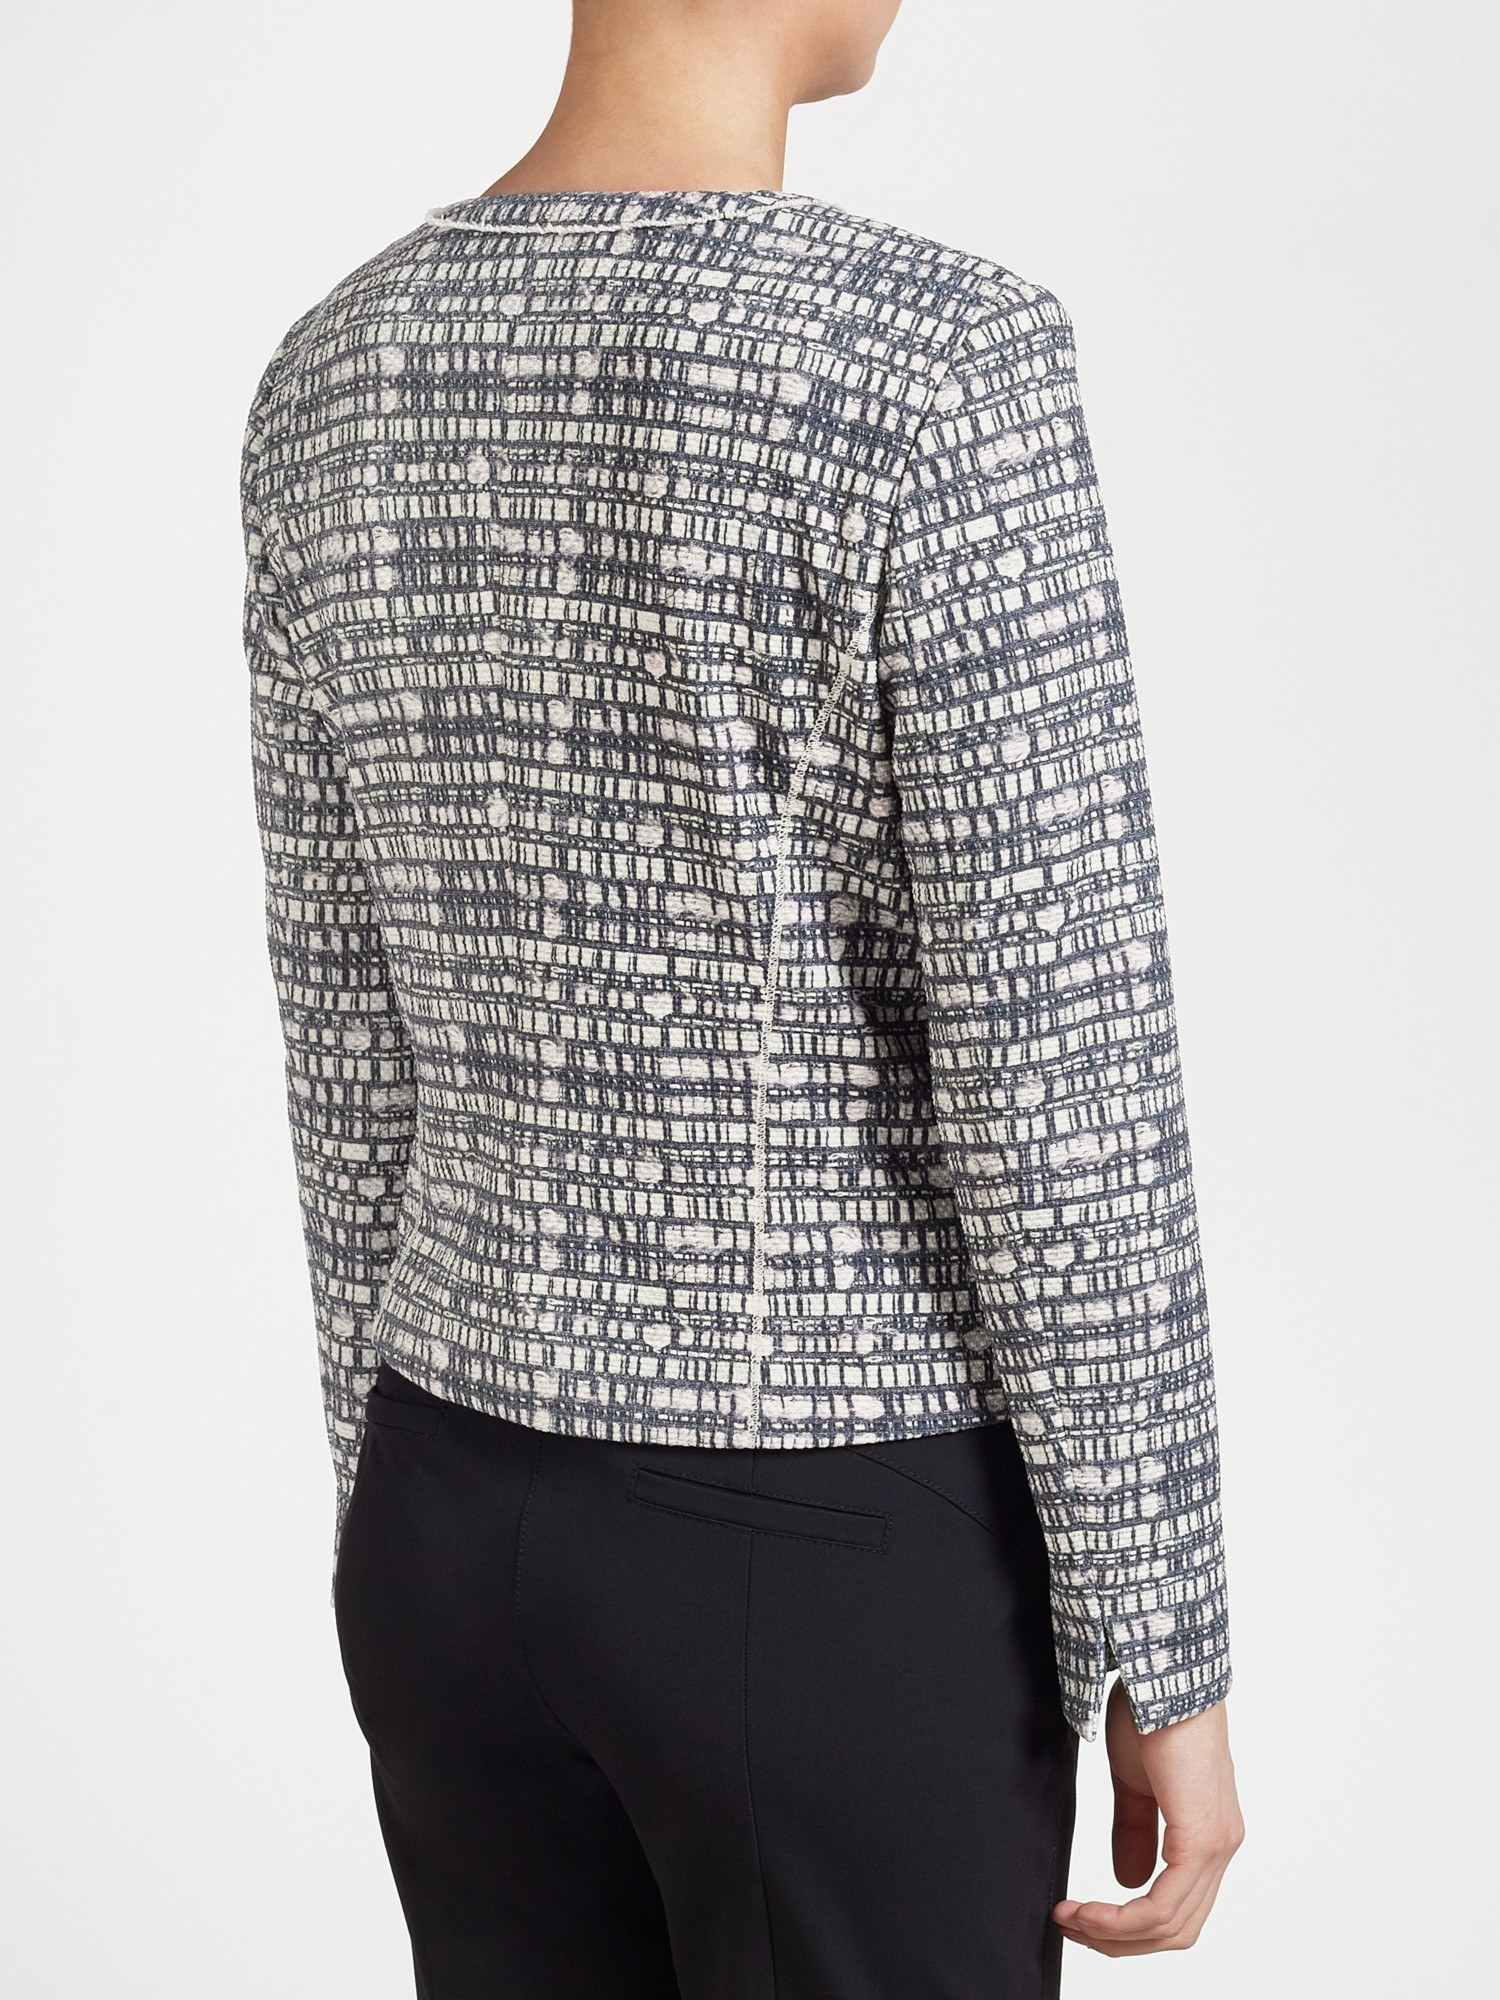 Gerry Weber Boucle Jacket in Gray - Lyst